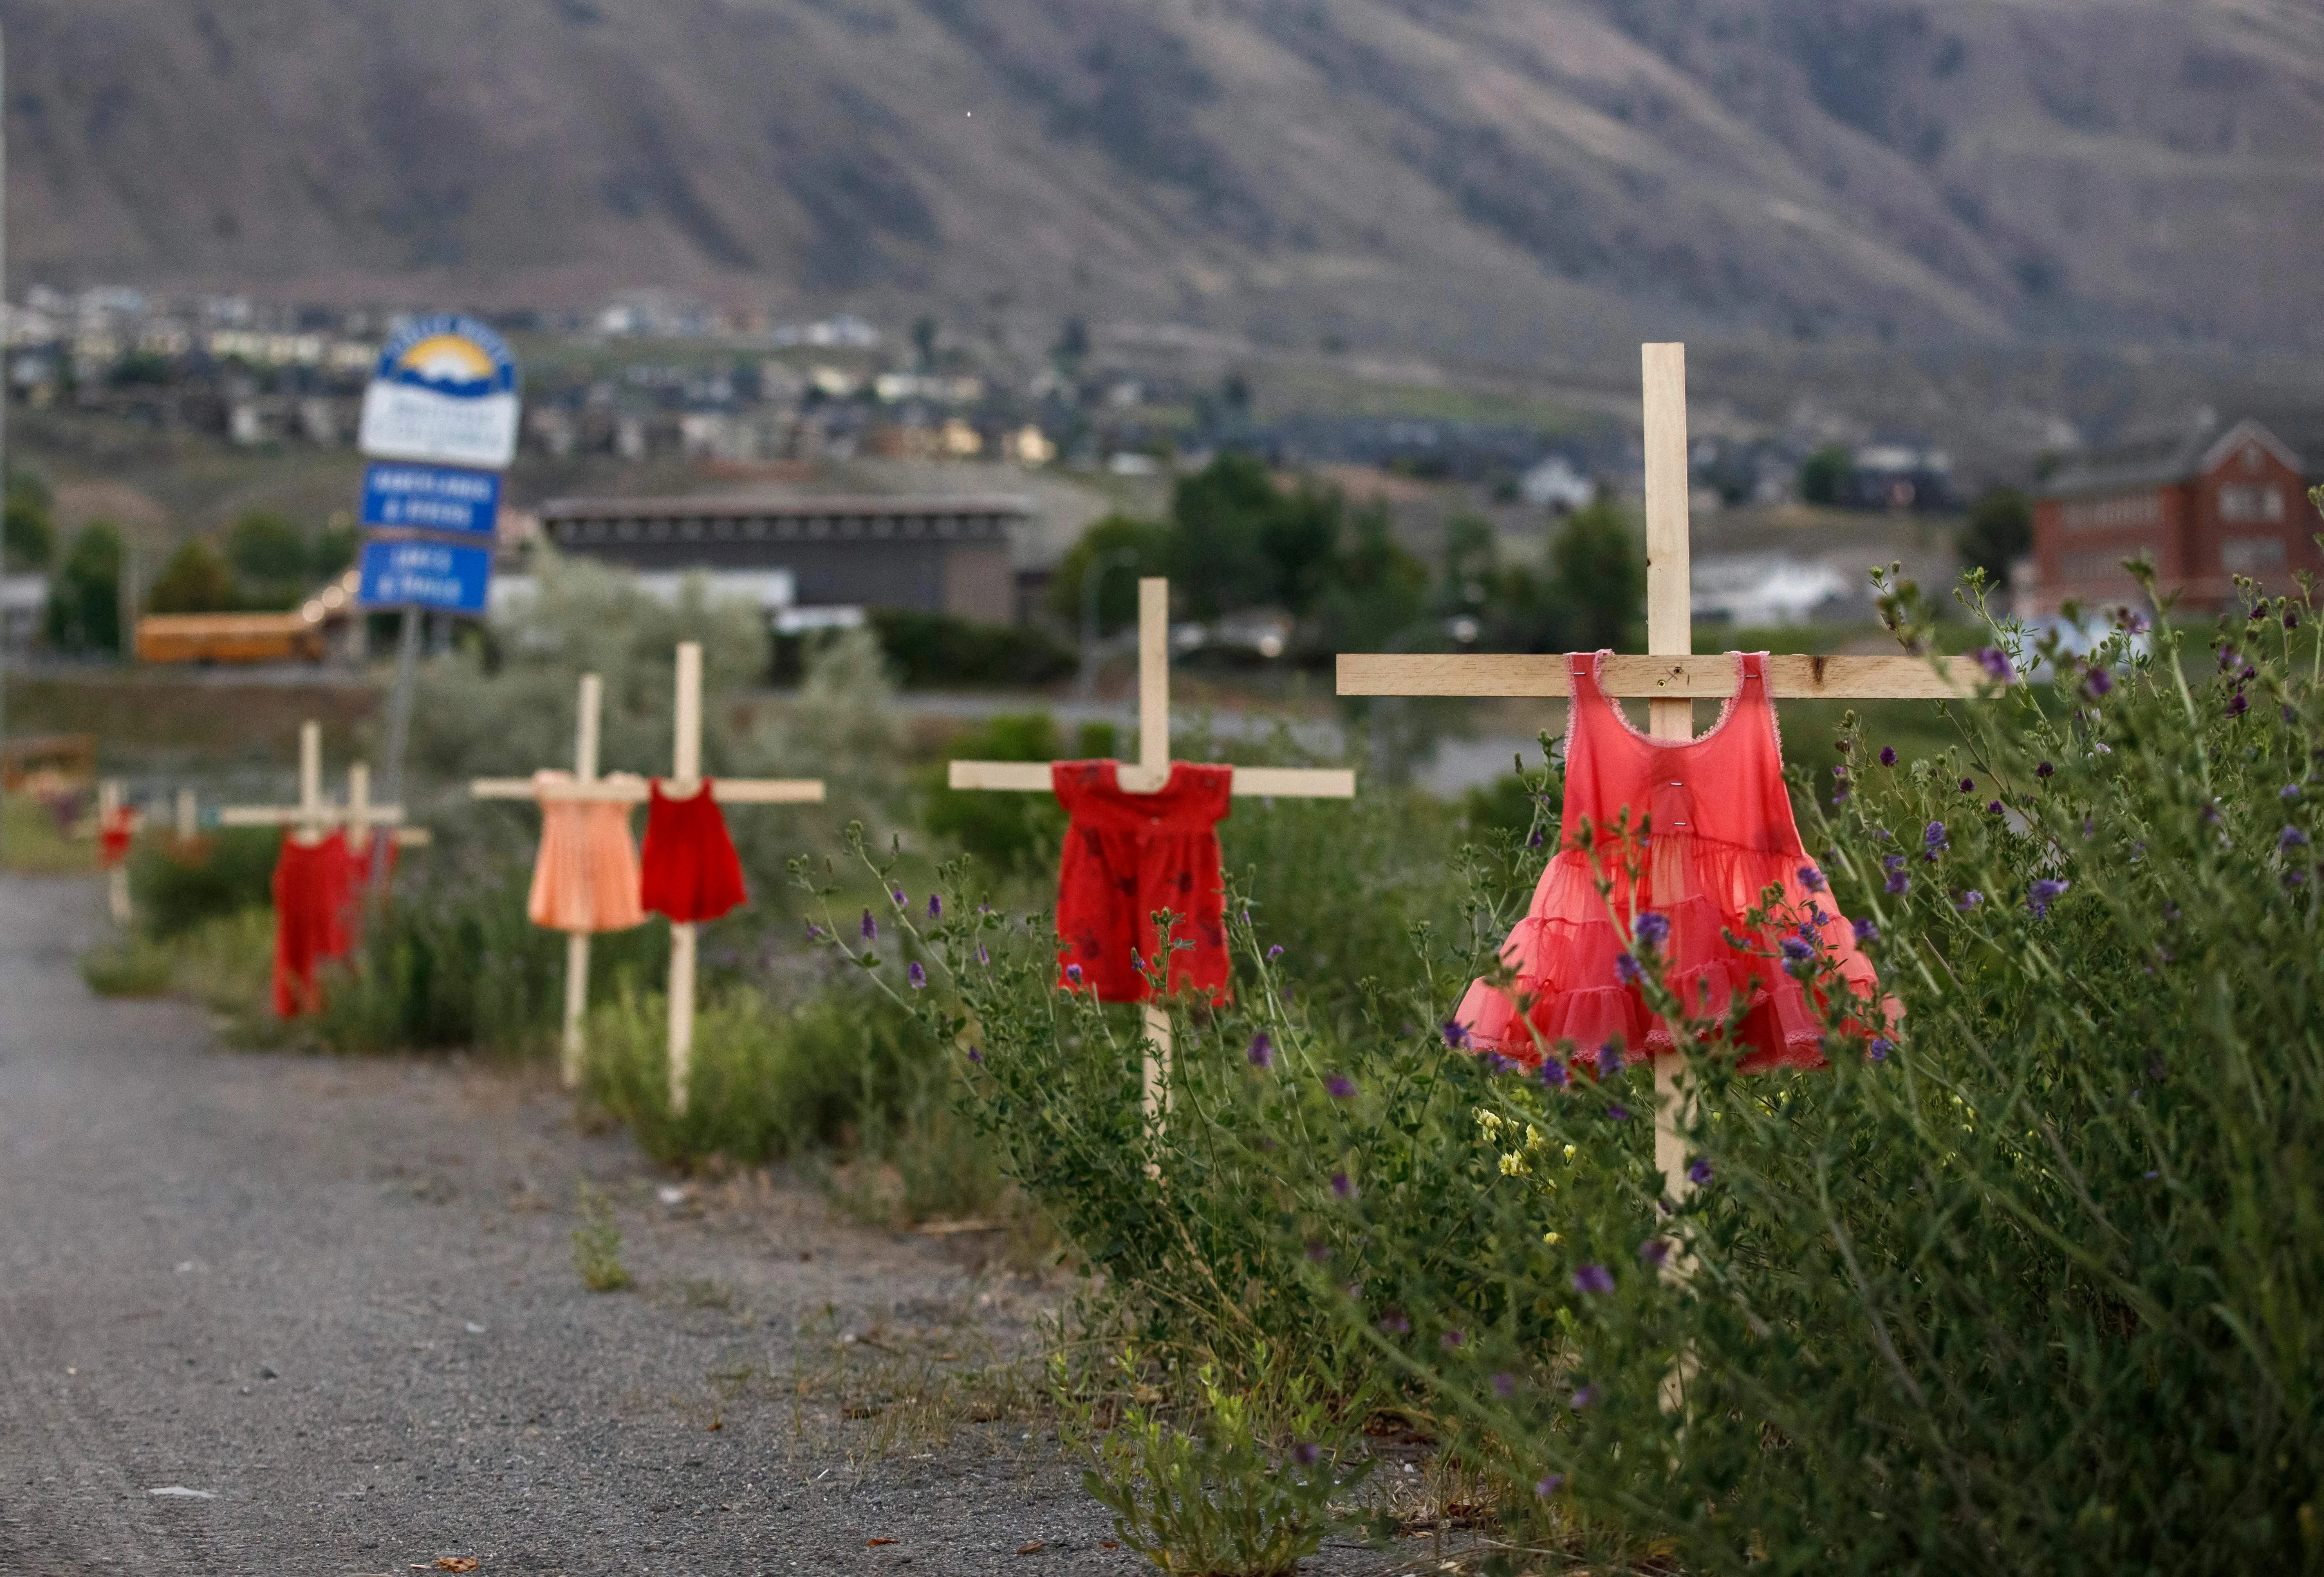 Children's red dresses are staked along a highway near the former Kamloops Indian Residential School where flowers and cards have been left as part of a makeshift memorial created in response to media reports that the "remains" of 215 children have been discovered buried near the facility, in Kamloops, British Columbia, Canada, on June 2, 2021.?w=200&h=150